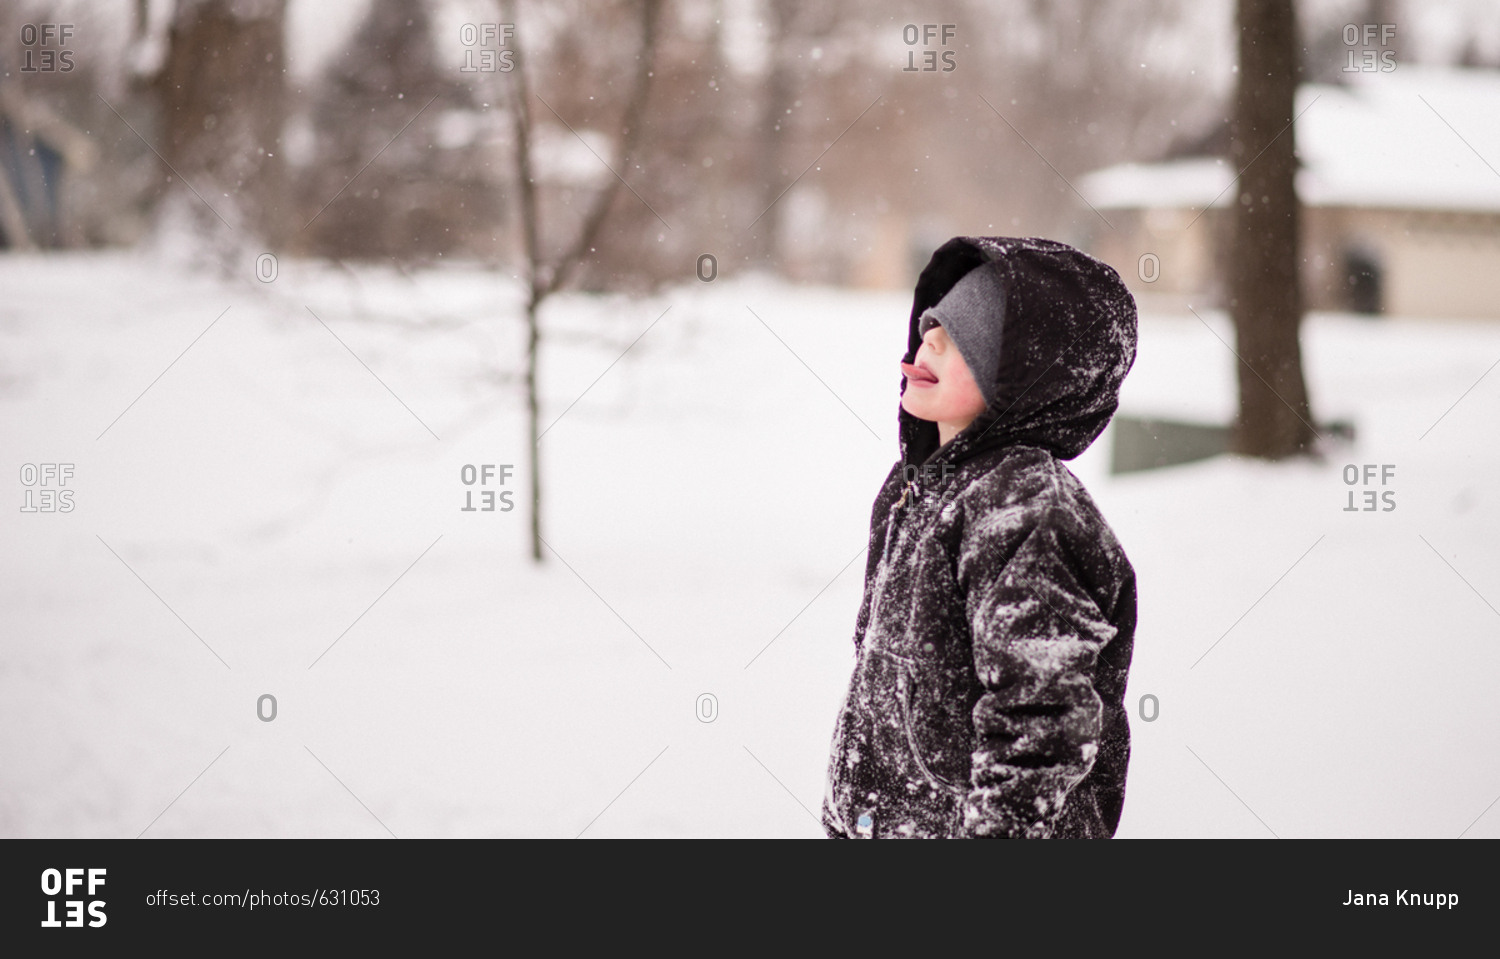 Boy in winter coat covered with snow catching snowflakes on his tongue